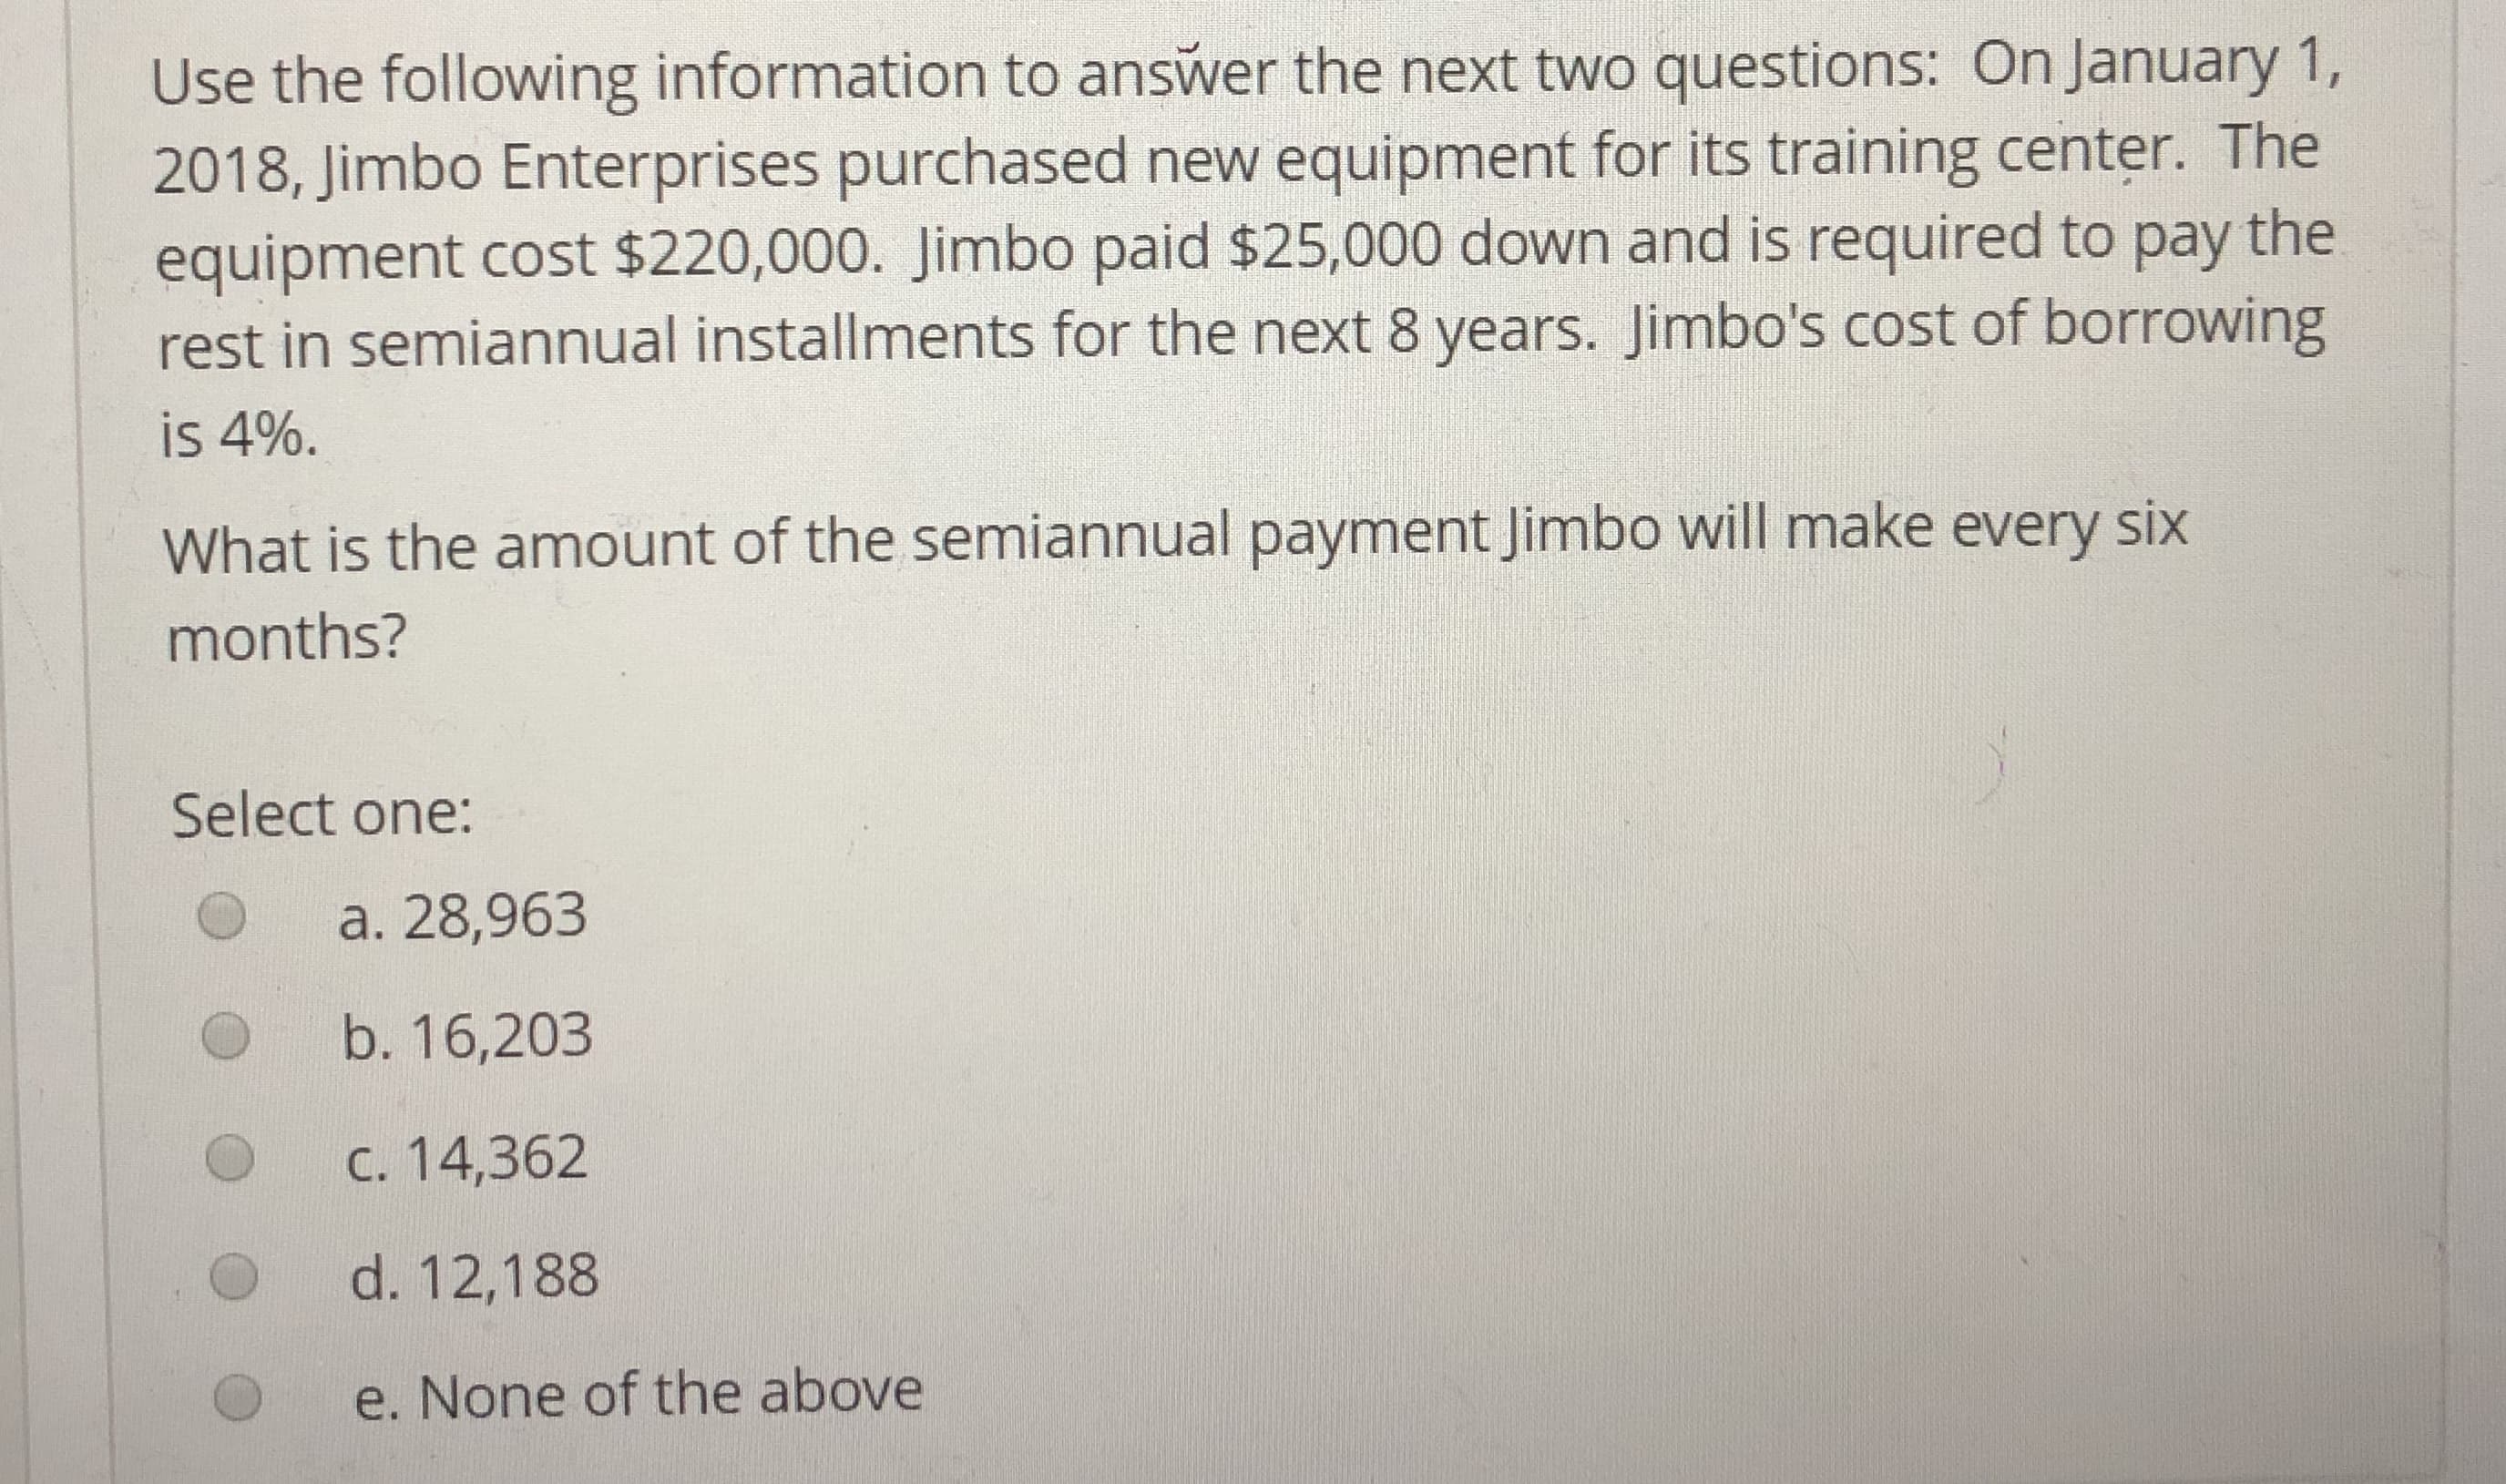 Use the following information to answer the next two questions: On January 1,
2018, Jimbo Enterprises purchased new equipment for its training center. The
equipment cost $220,000. Jimbo paid $25,000 down and is required to pay the
rest in semiannual installments for the next 8 years. Jimbo's cost of borrowing
is 4%.
What is the amount of the semiannual payment Jimbo will make every six
months?
Select one:
O a. 28,963
b. 16,203
c. 14,362
d. 12,188
e. None of the above
